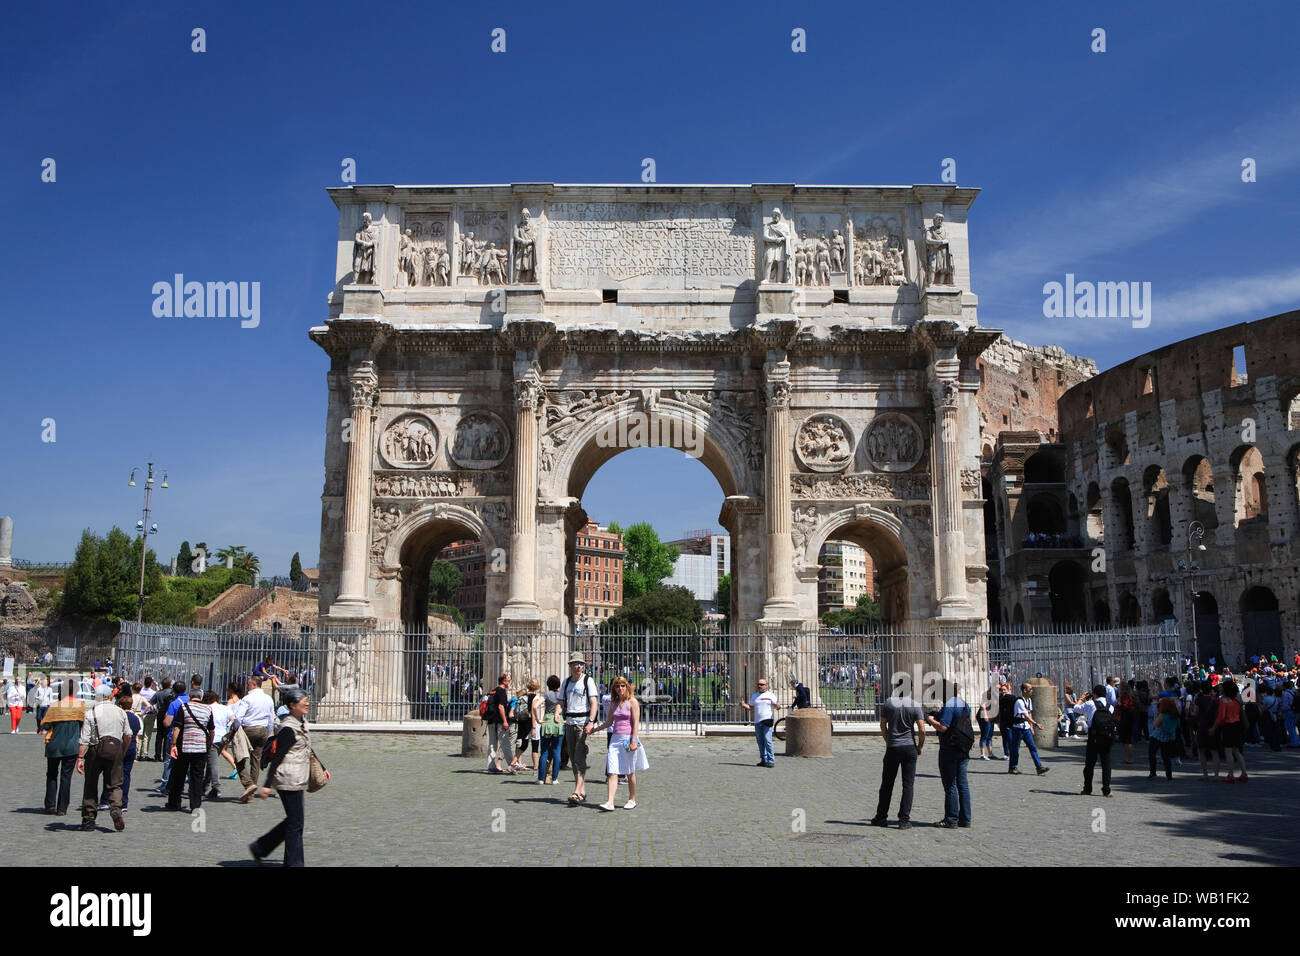 The Arch of Constantine by the Colosseum, Rome. Built to commemorate victory by Constantine I at the Battle of Milvian Bridge. Stock Photo